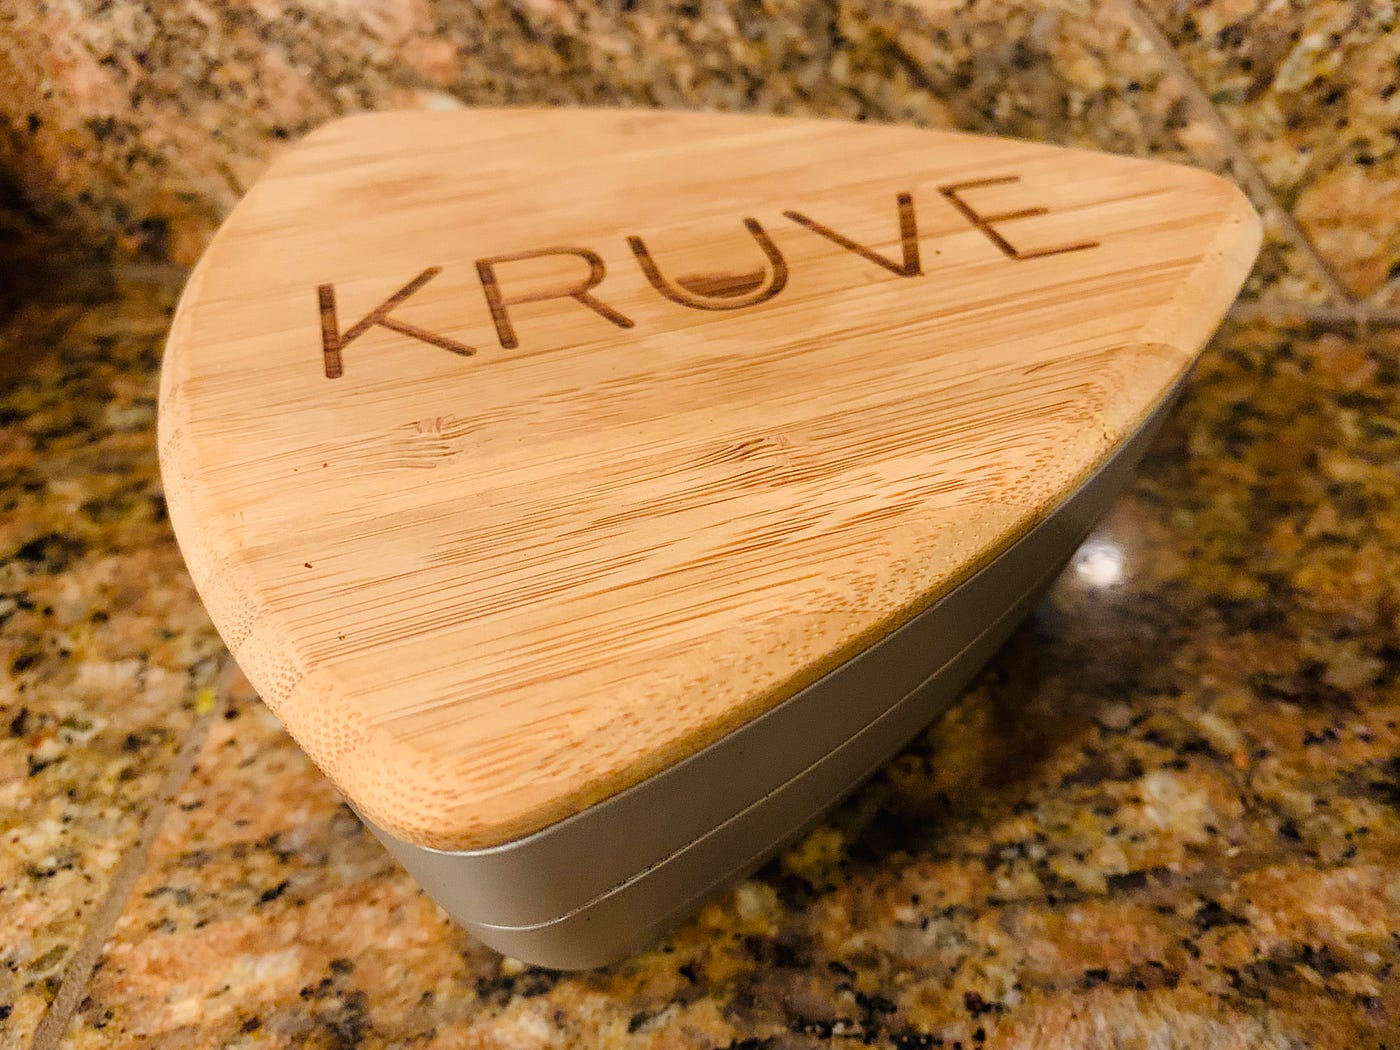 Kruve Coffee Sifter: An Analysis. As I've been improving my